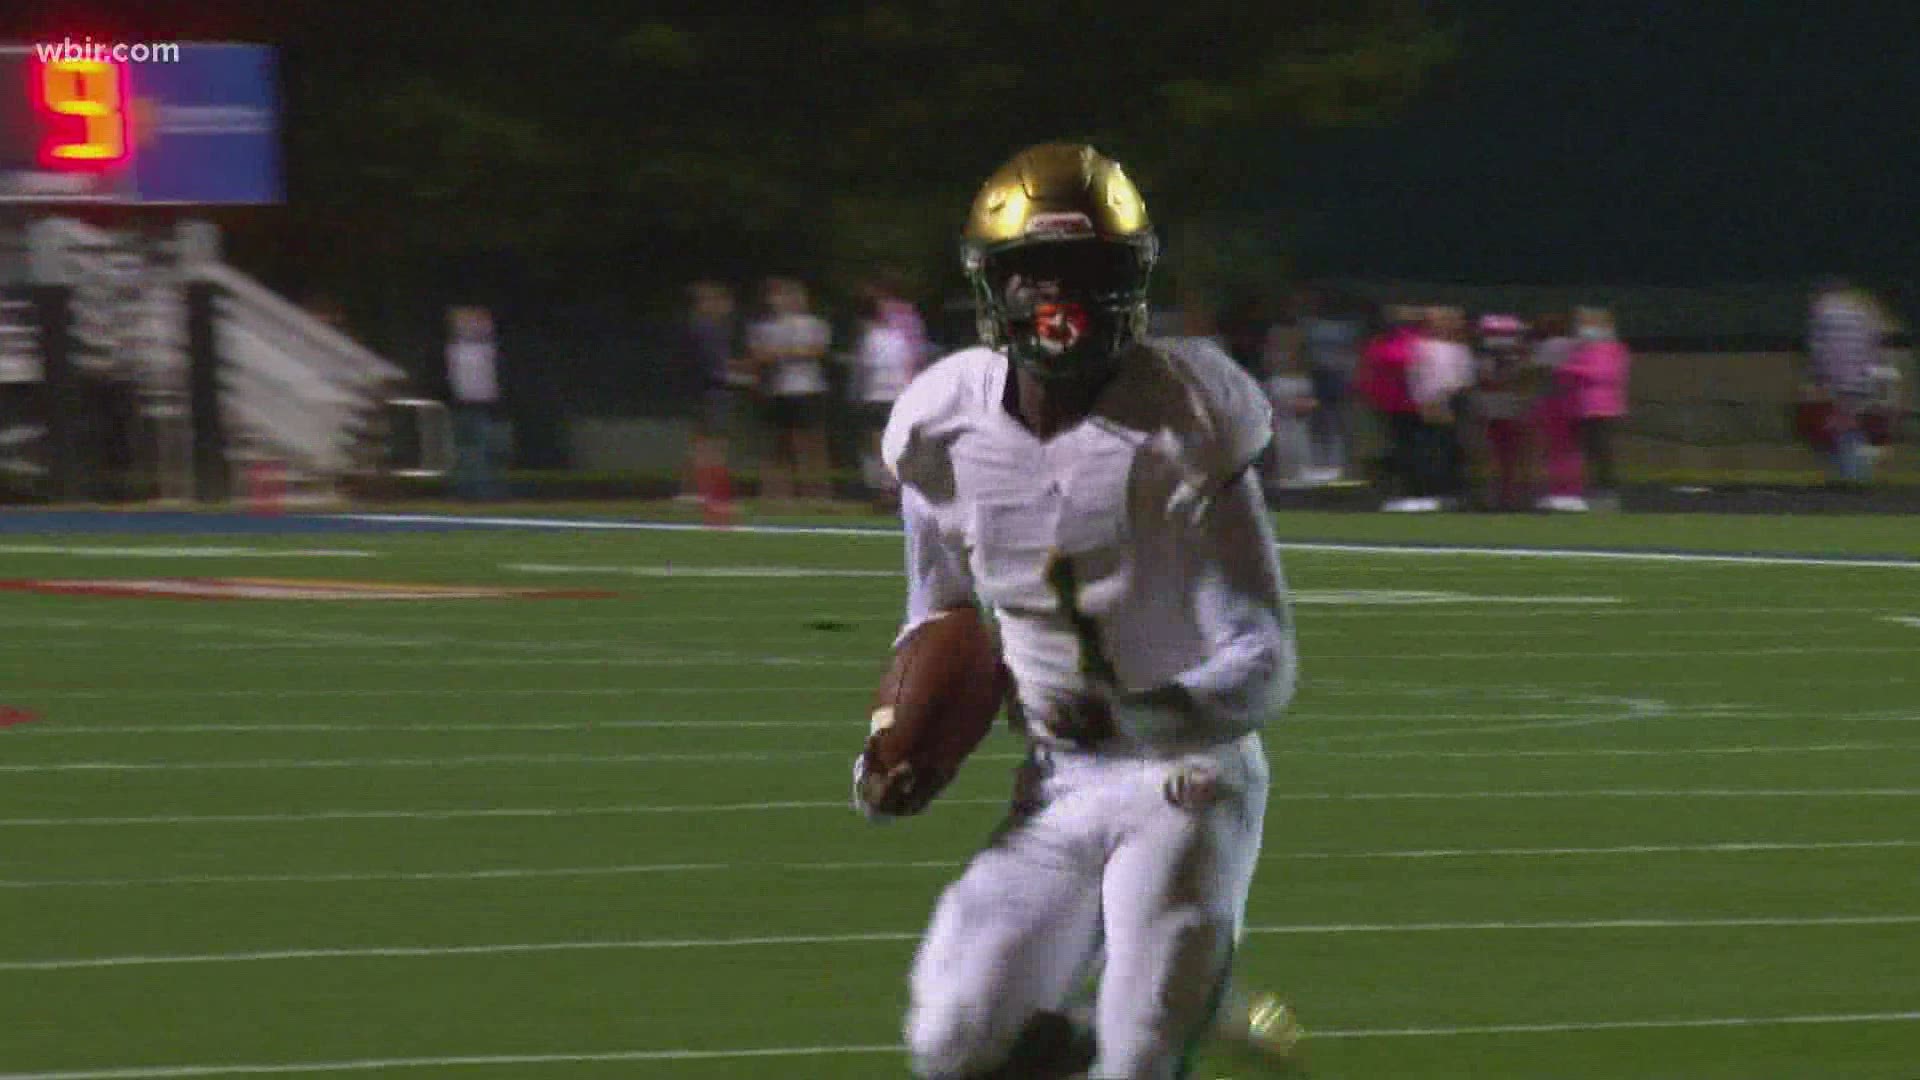 After a quick turnaround, Catholic beats West on the road.